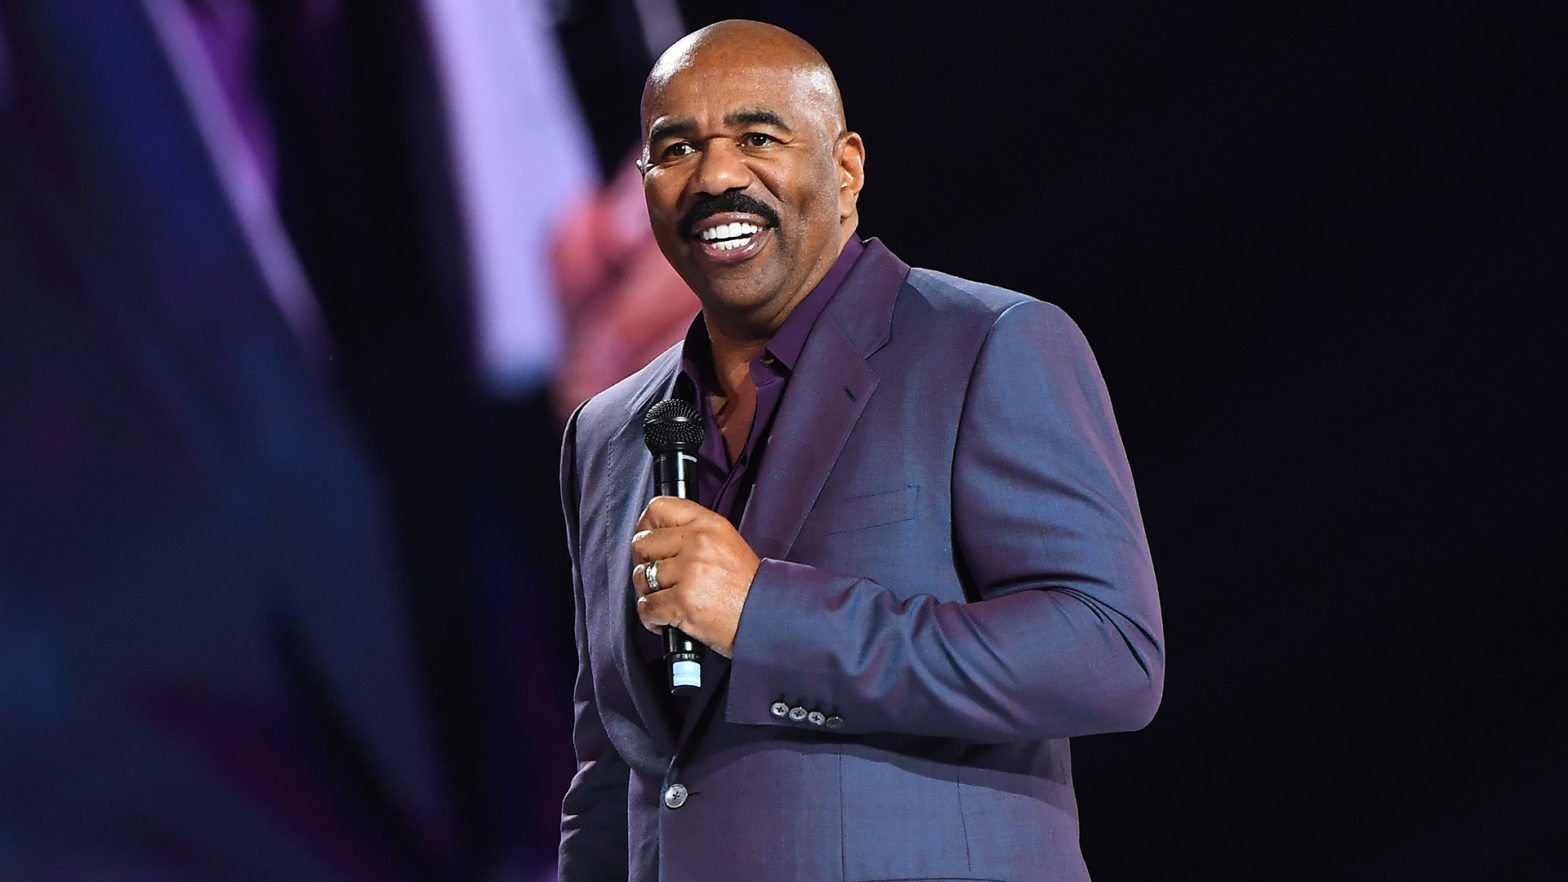 After The Miss Universe Mishap, Steve Harvey Secured Ownership — 'Now I Own Miss Universe, Miss USA, Miss Teen USA'